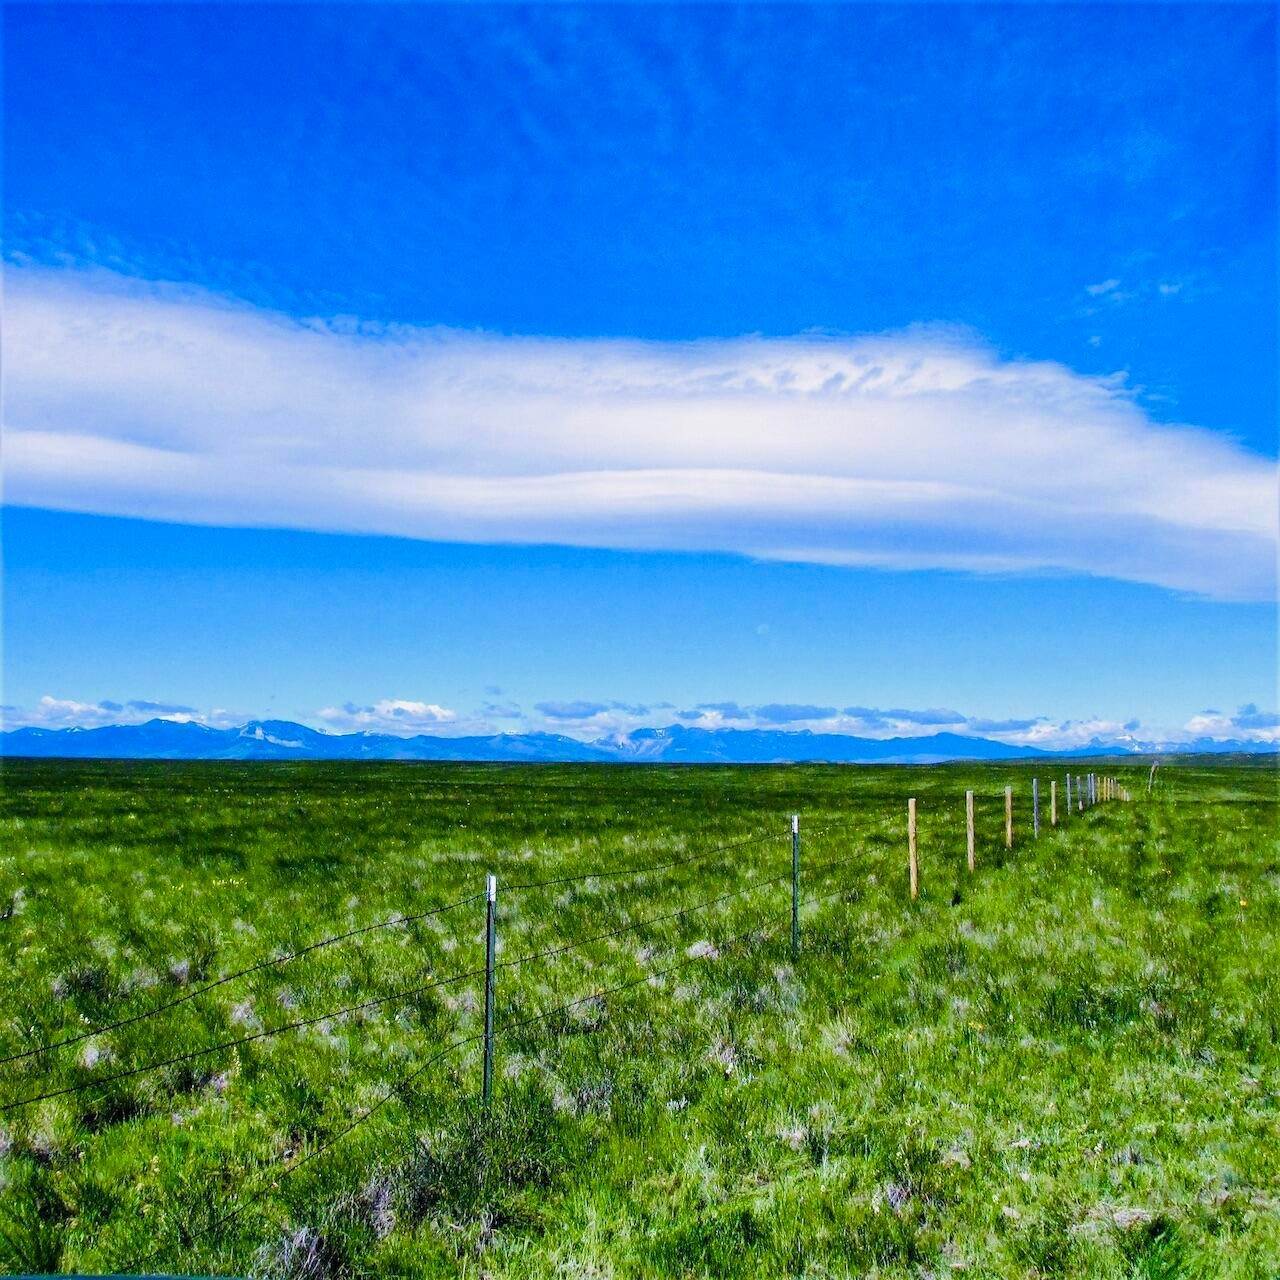 Farm / Agriculture for Sale at 9197 Us-89, Valier, Montana 59486 United States